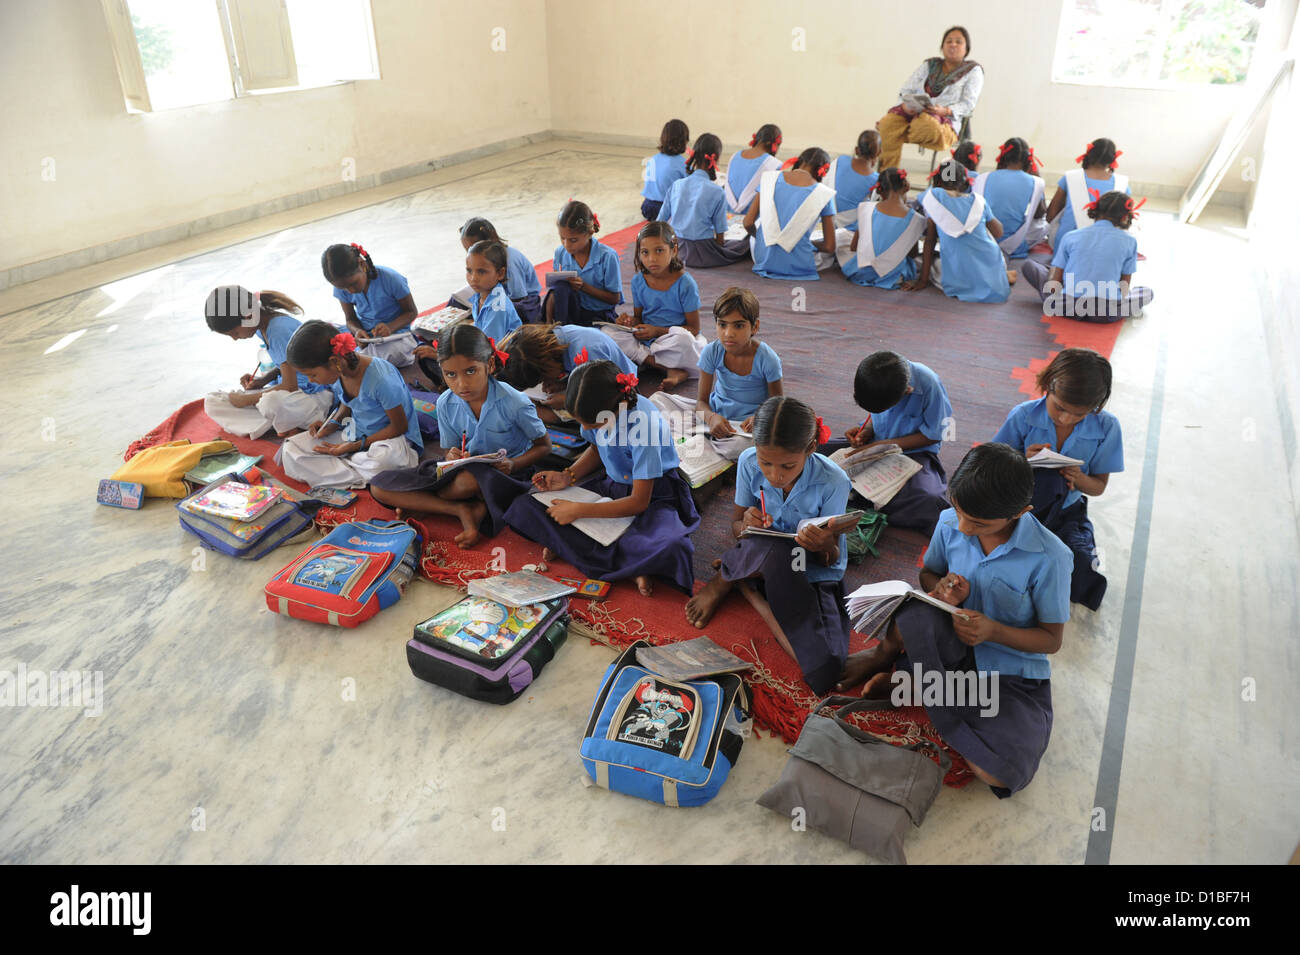 Students Of Two Classes Sit On The Floor Of A Classroom In The